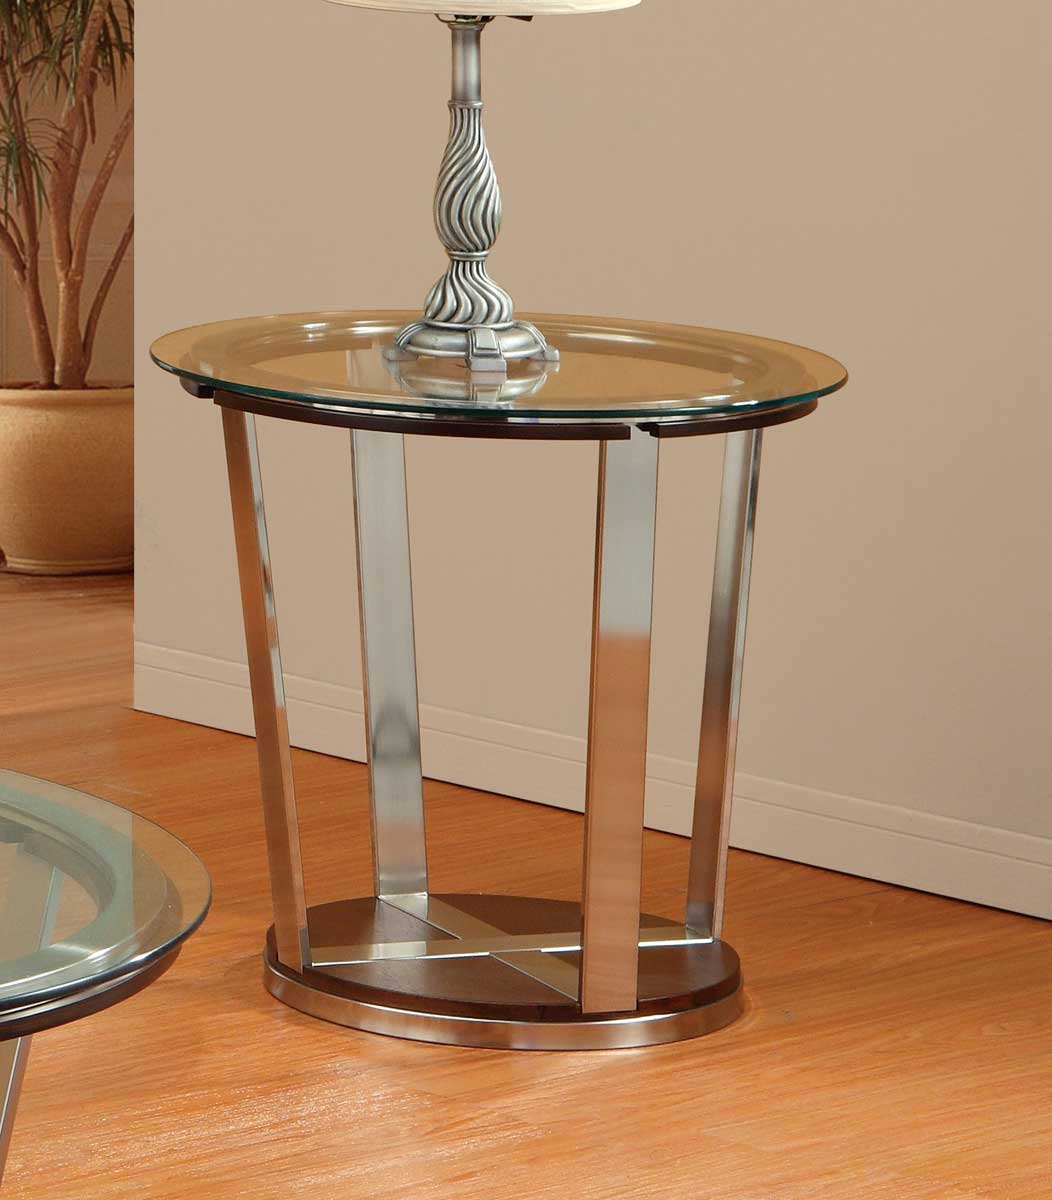 Homelegance Dunham End Table - Medium Brown Wood and Bronzed over Metal